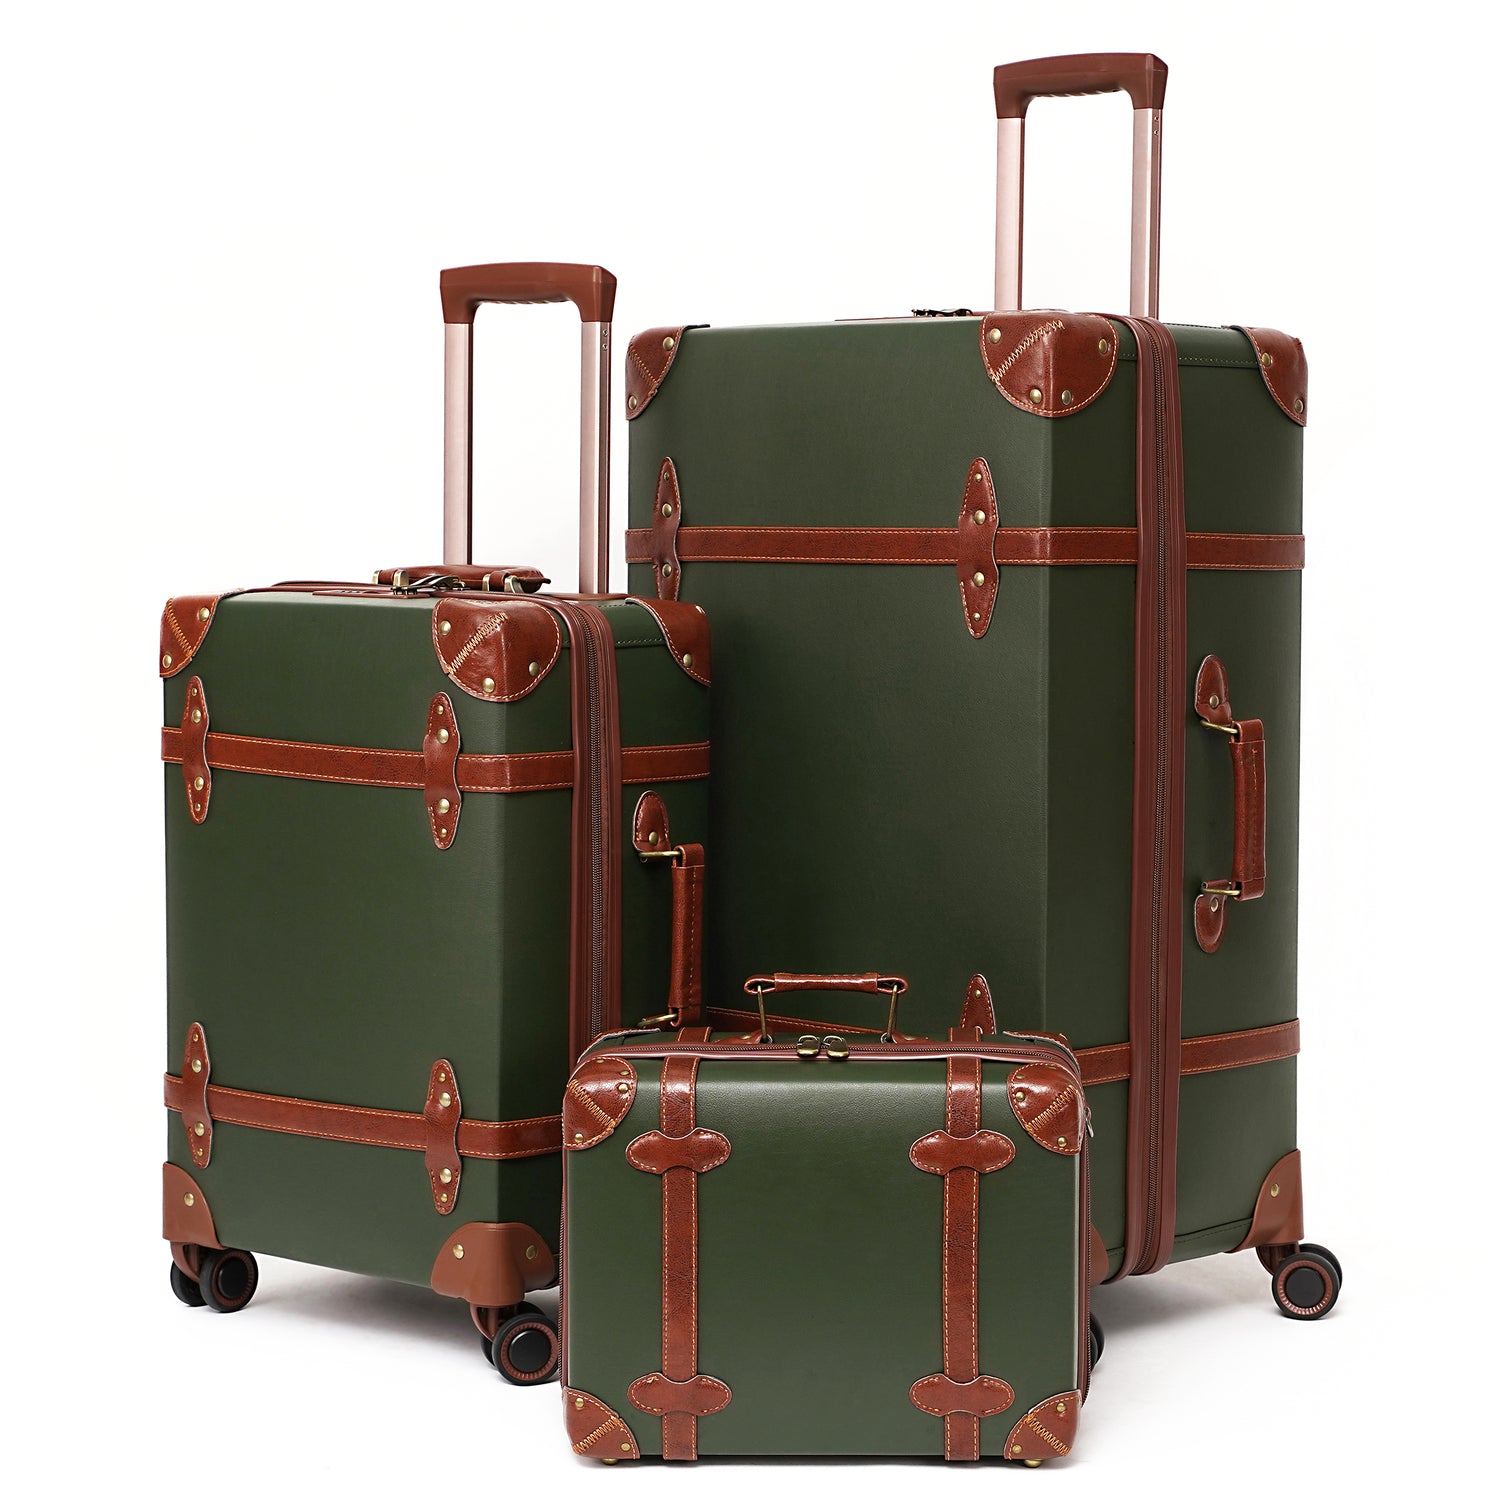 Urecity ​Handmade Vintage Luggage Set with Swivel Caster,PU Leather  Suitcase for Men and Women